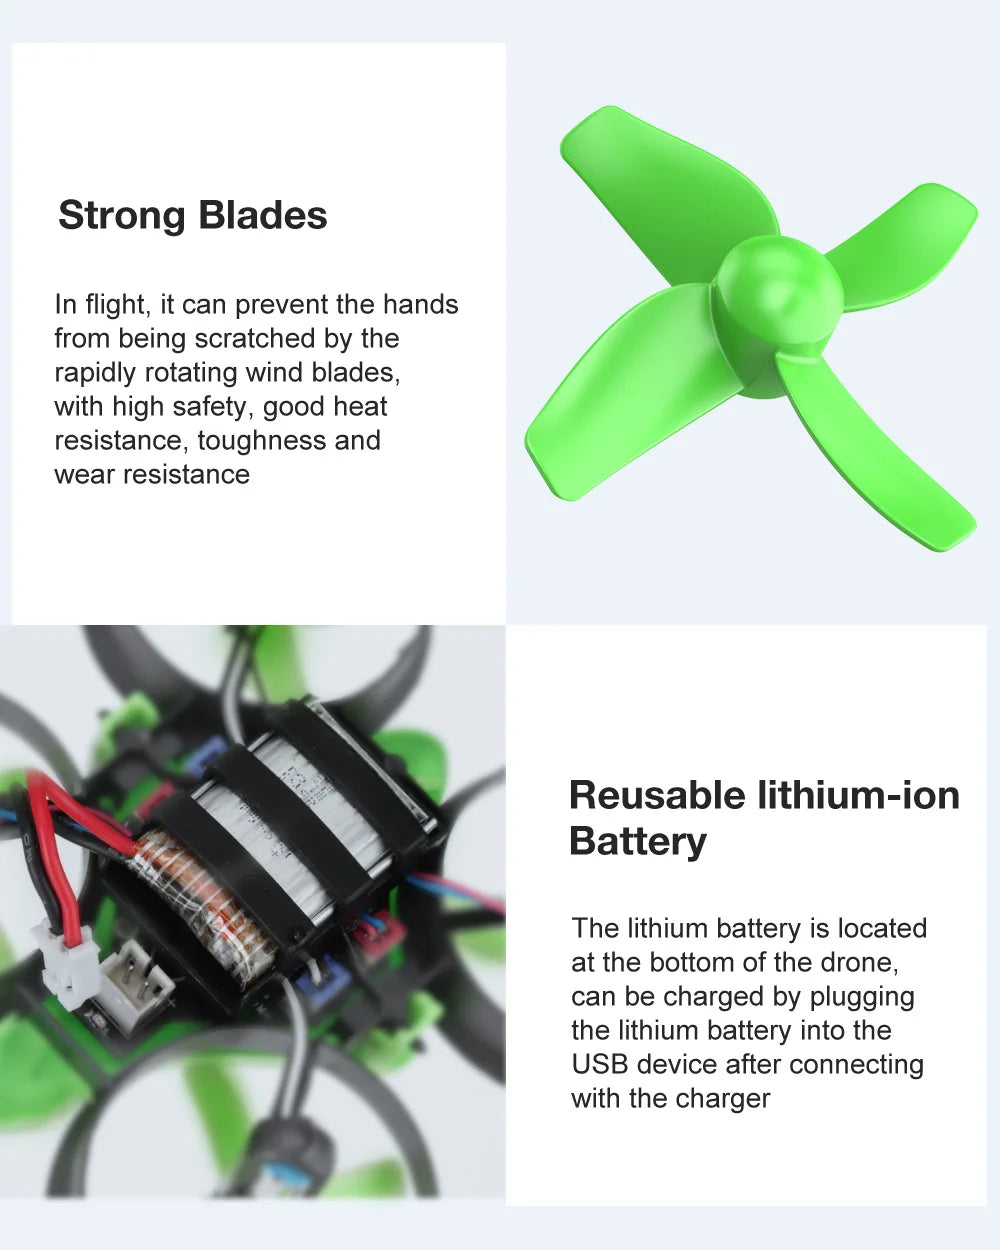 Eachine E017 Mini Drone, reusable iithium-ion battery is located at